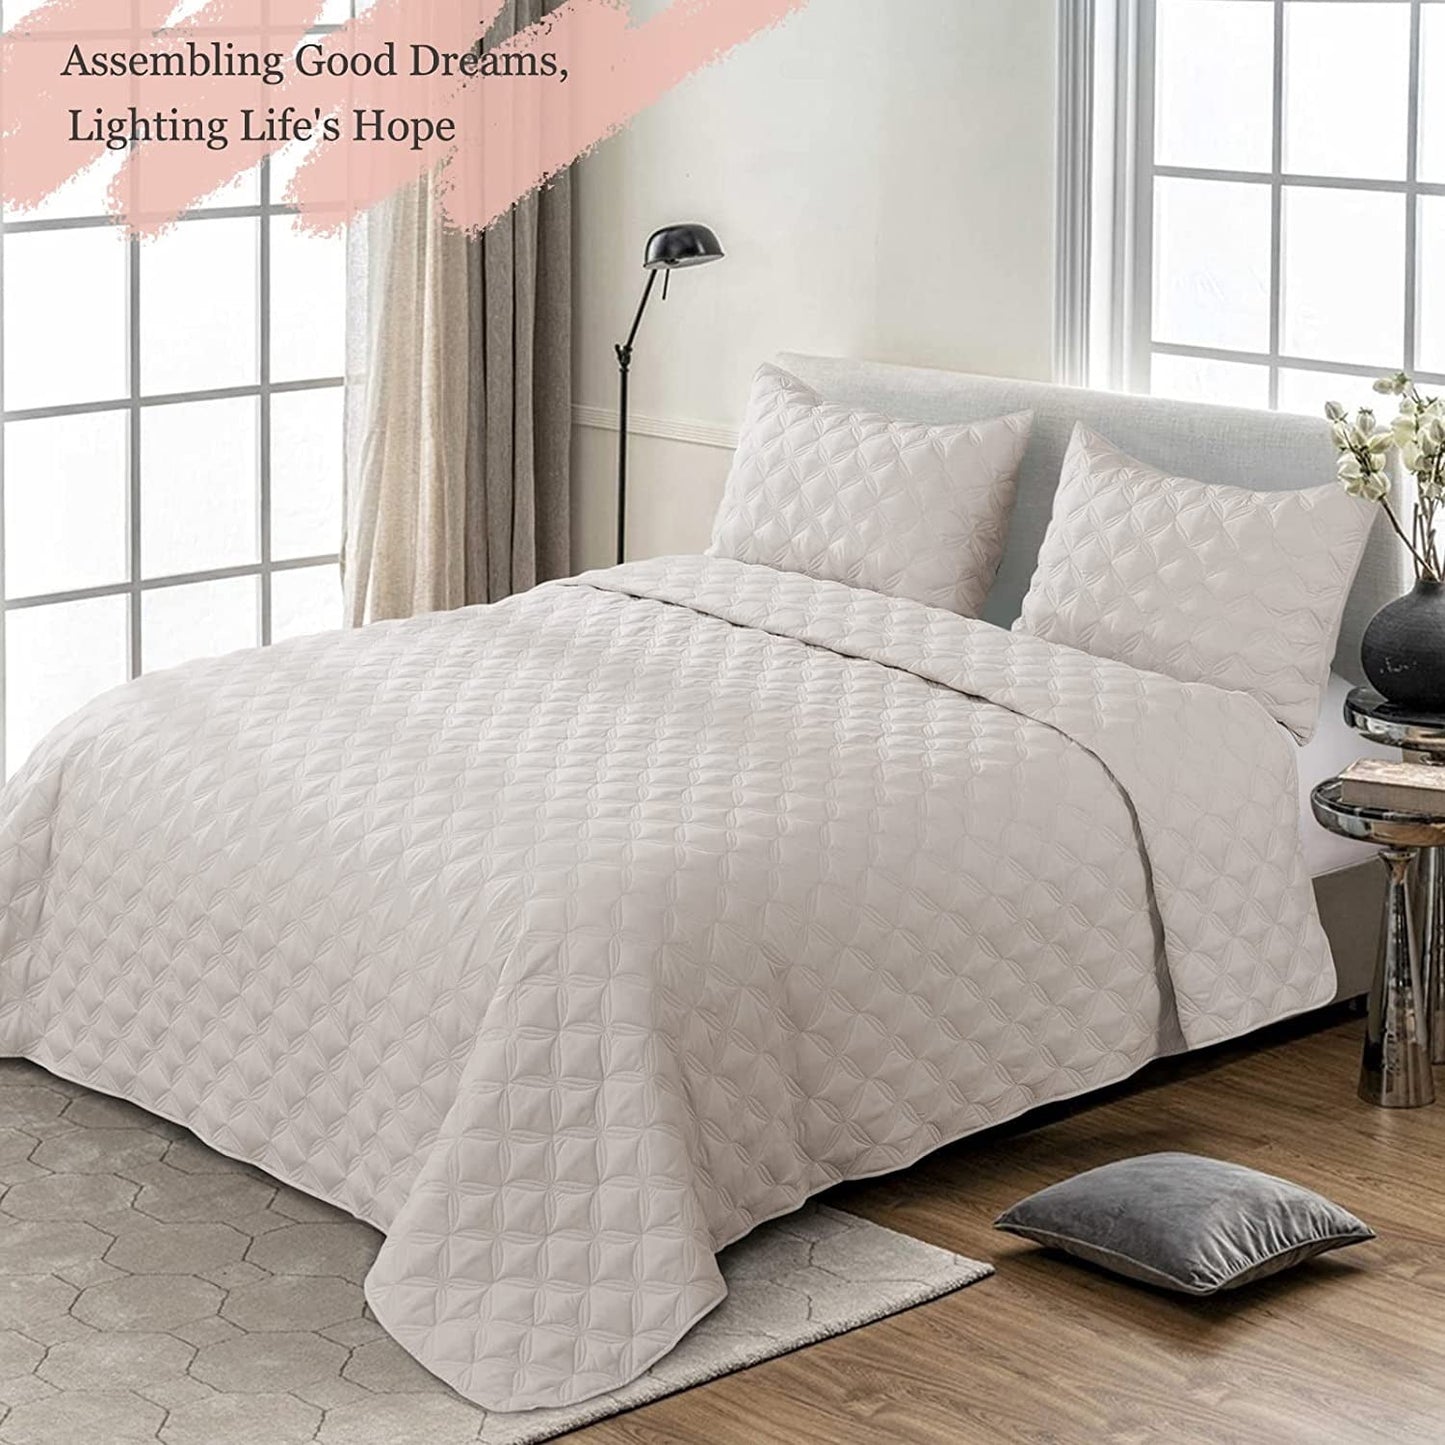 Exclusivo Mezcla Bed Quilt Set King Size for All Season, Stitched Pattern Quilted Bedspread/ Bedding Set/ Coverlet with 2 Pillow shams, Lightweight and Soft, Bone